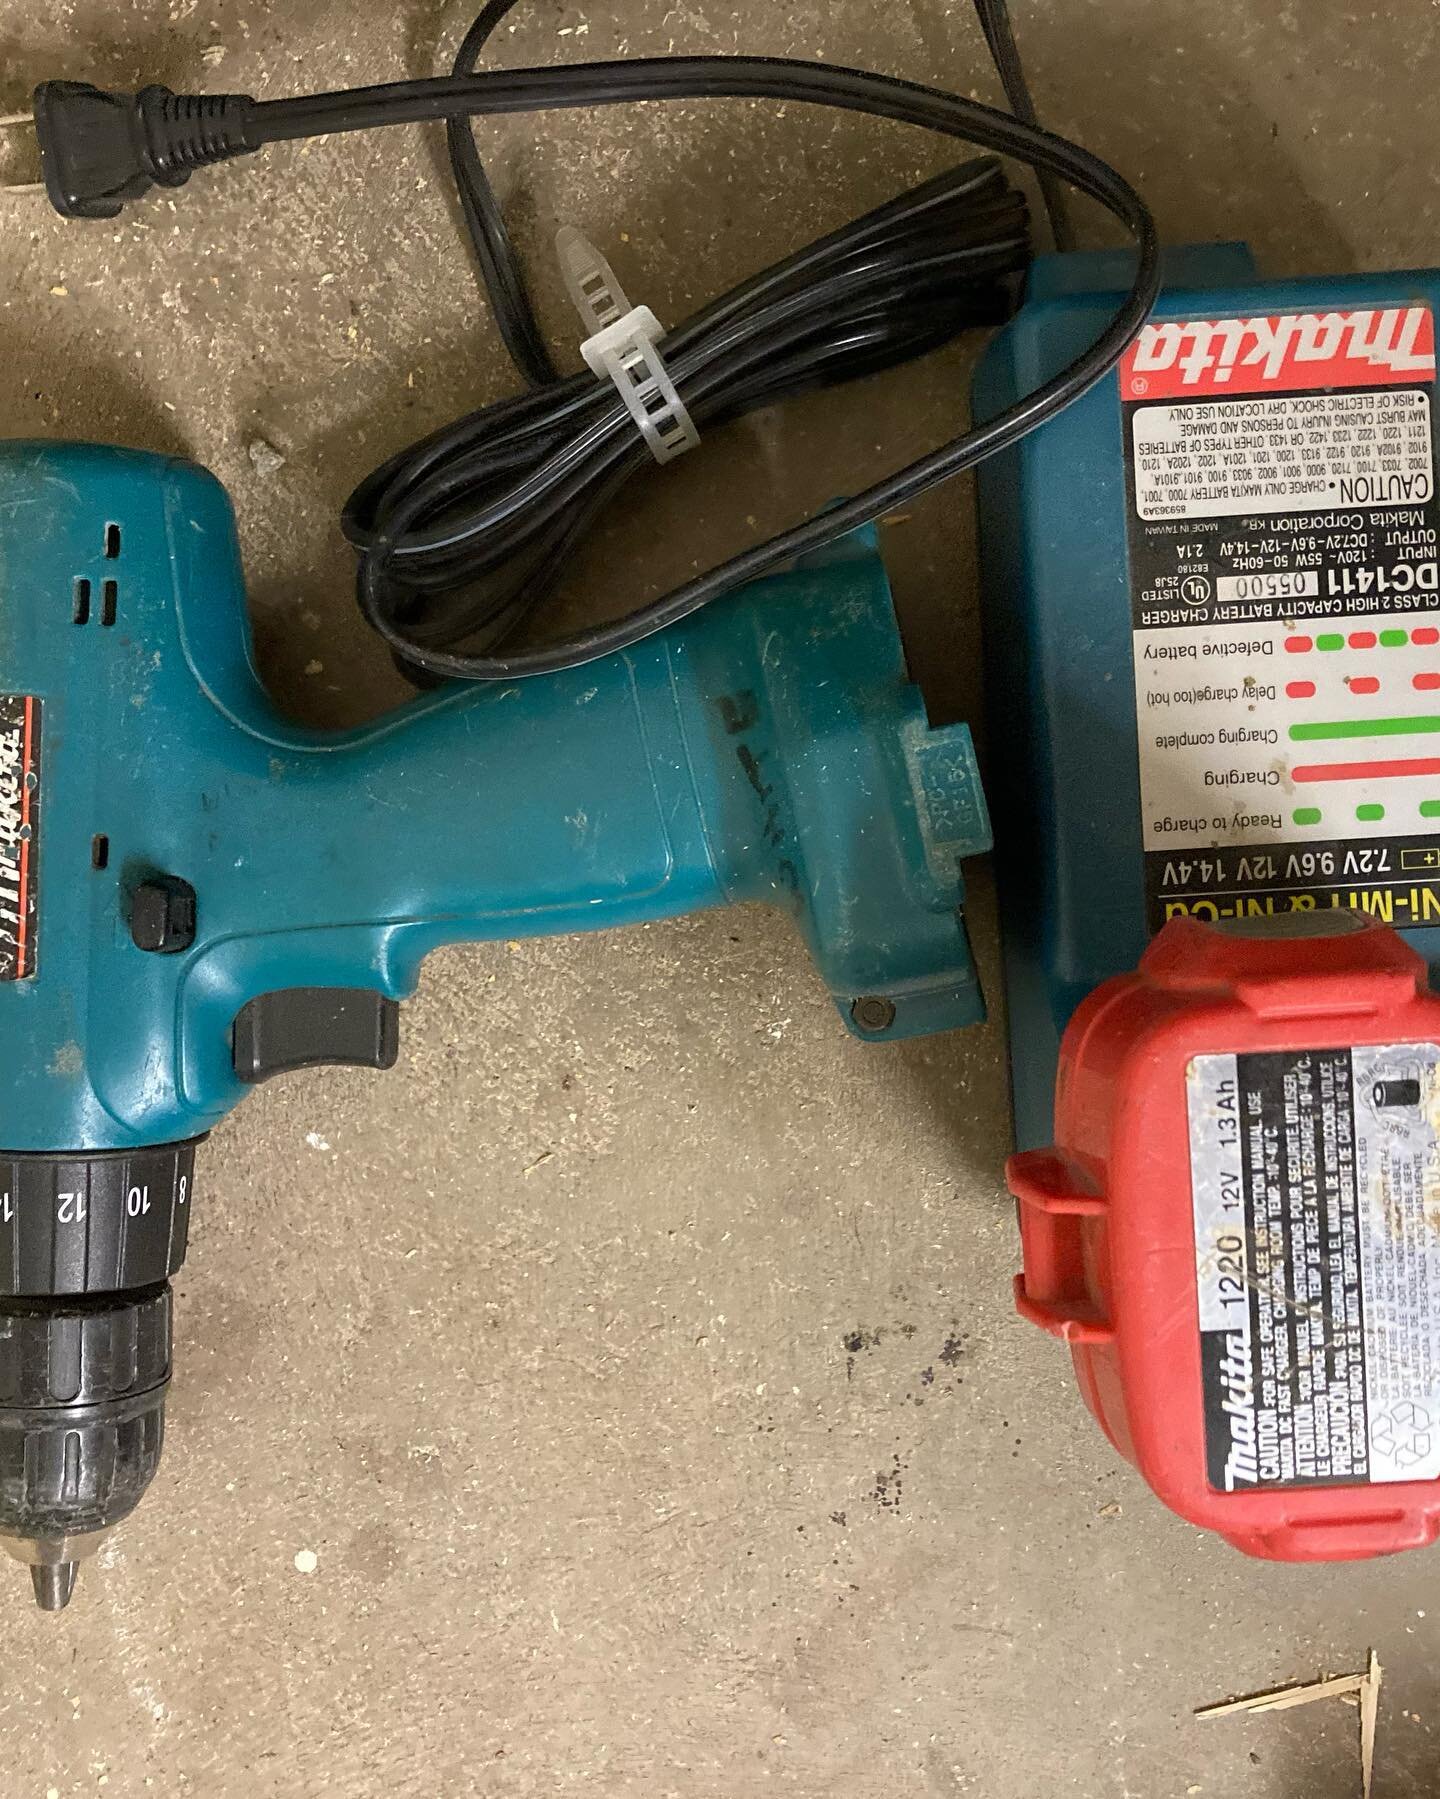 Makita drill. All charged. Works. No case one battery and charger 
25$ #salvagesistersgunnison ##wildfindsgunnison #makitatools